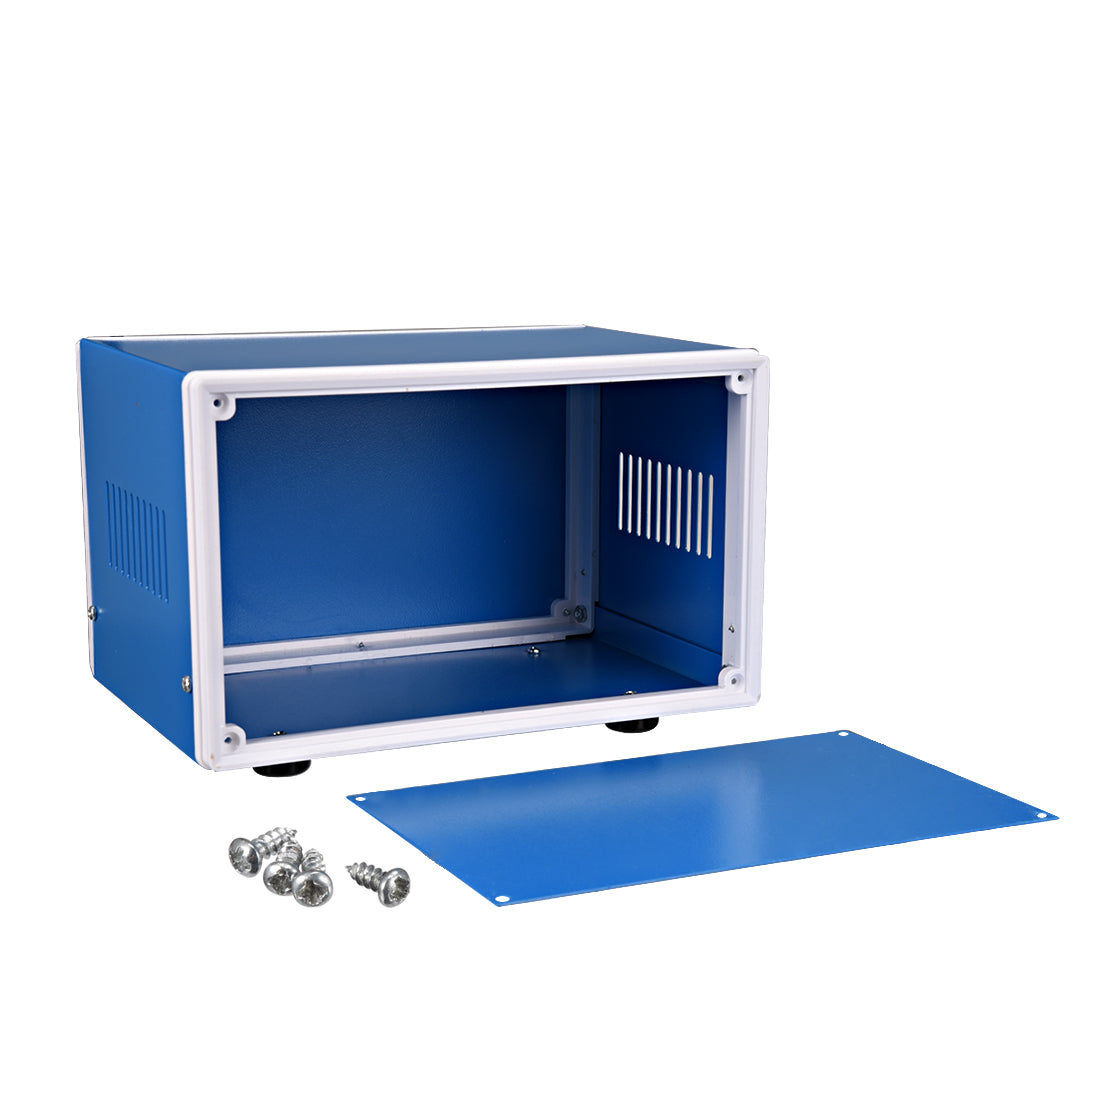 uxcell Uxcell Metal Blue Project Junction Box Enclosure Case 180 x 130 x 110mm/7.09 x 5.12 x 4.33inch